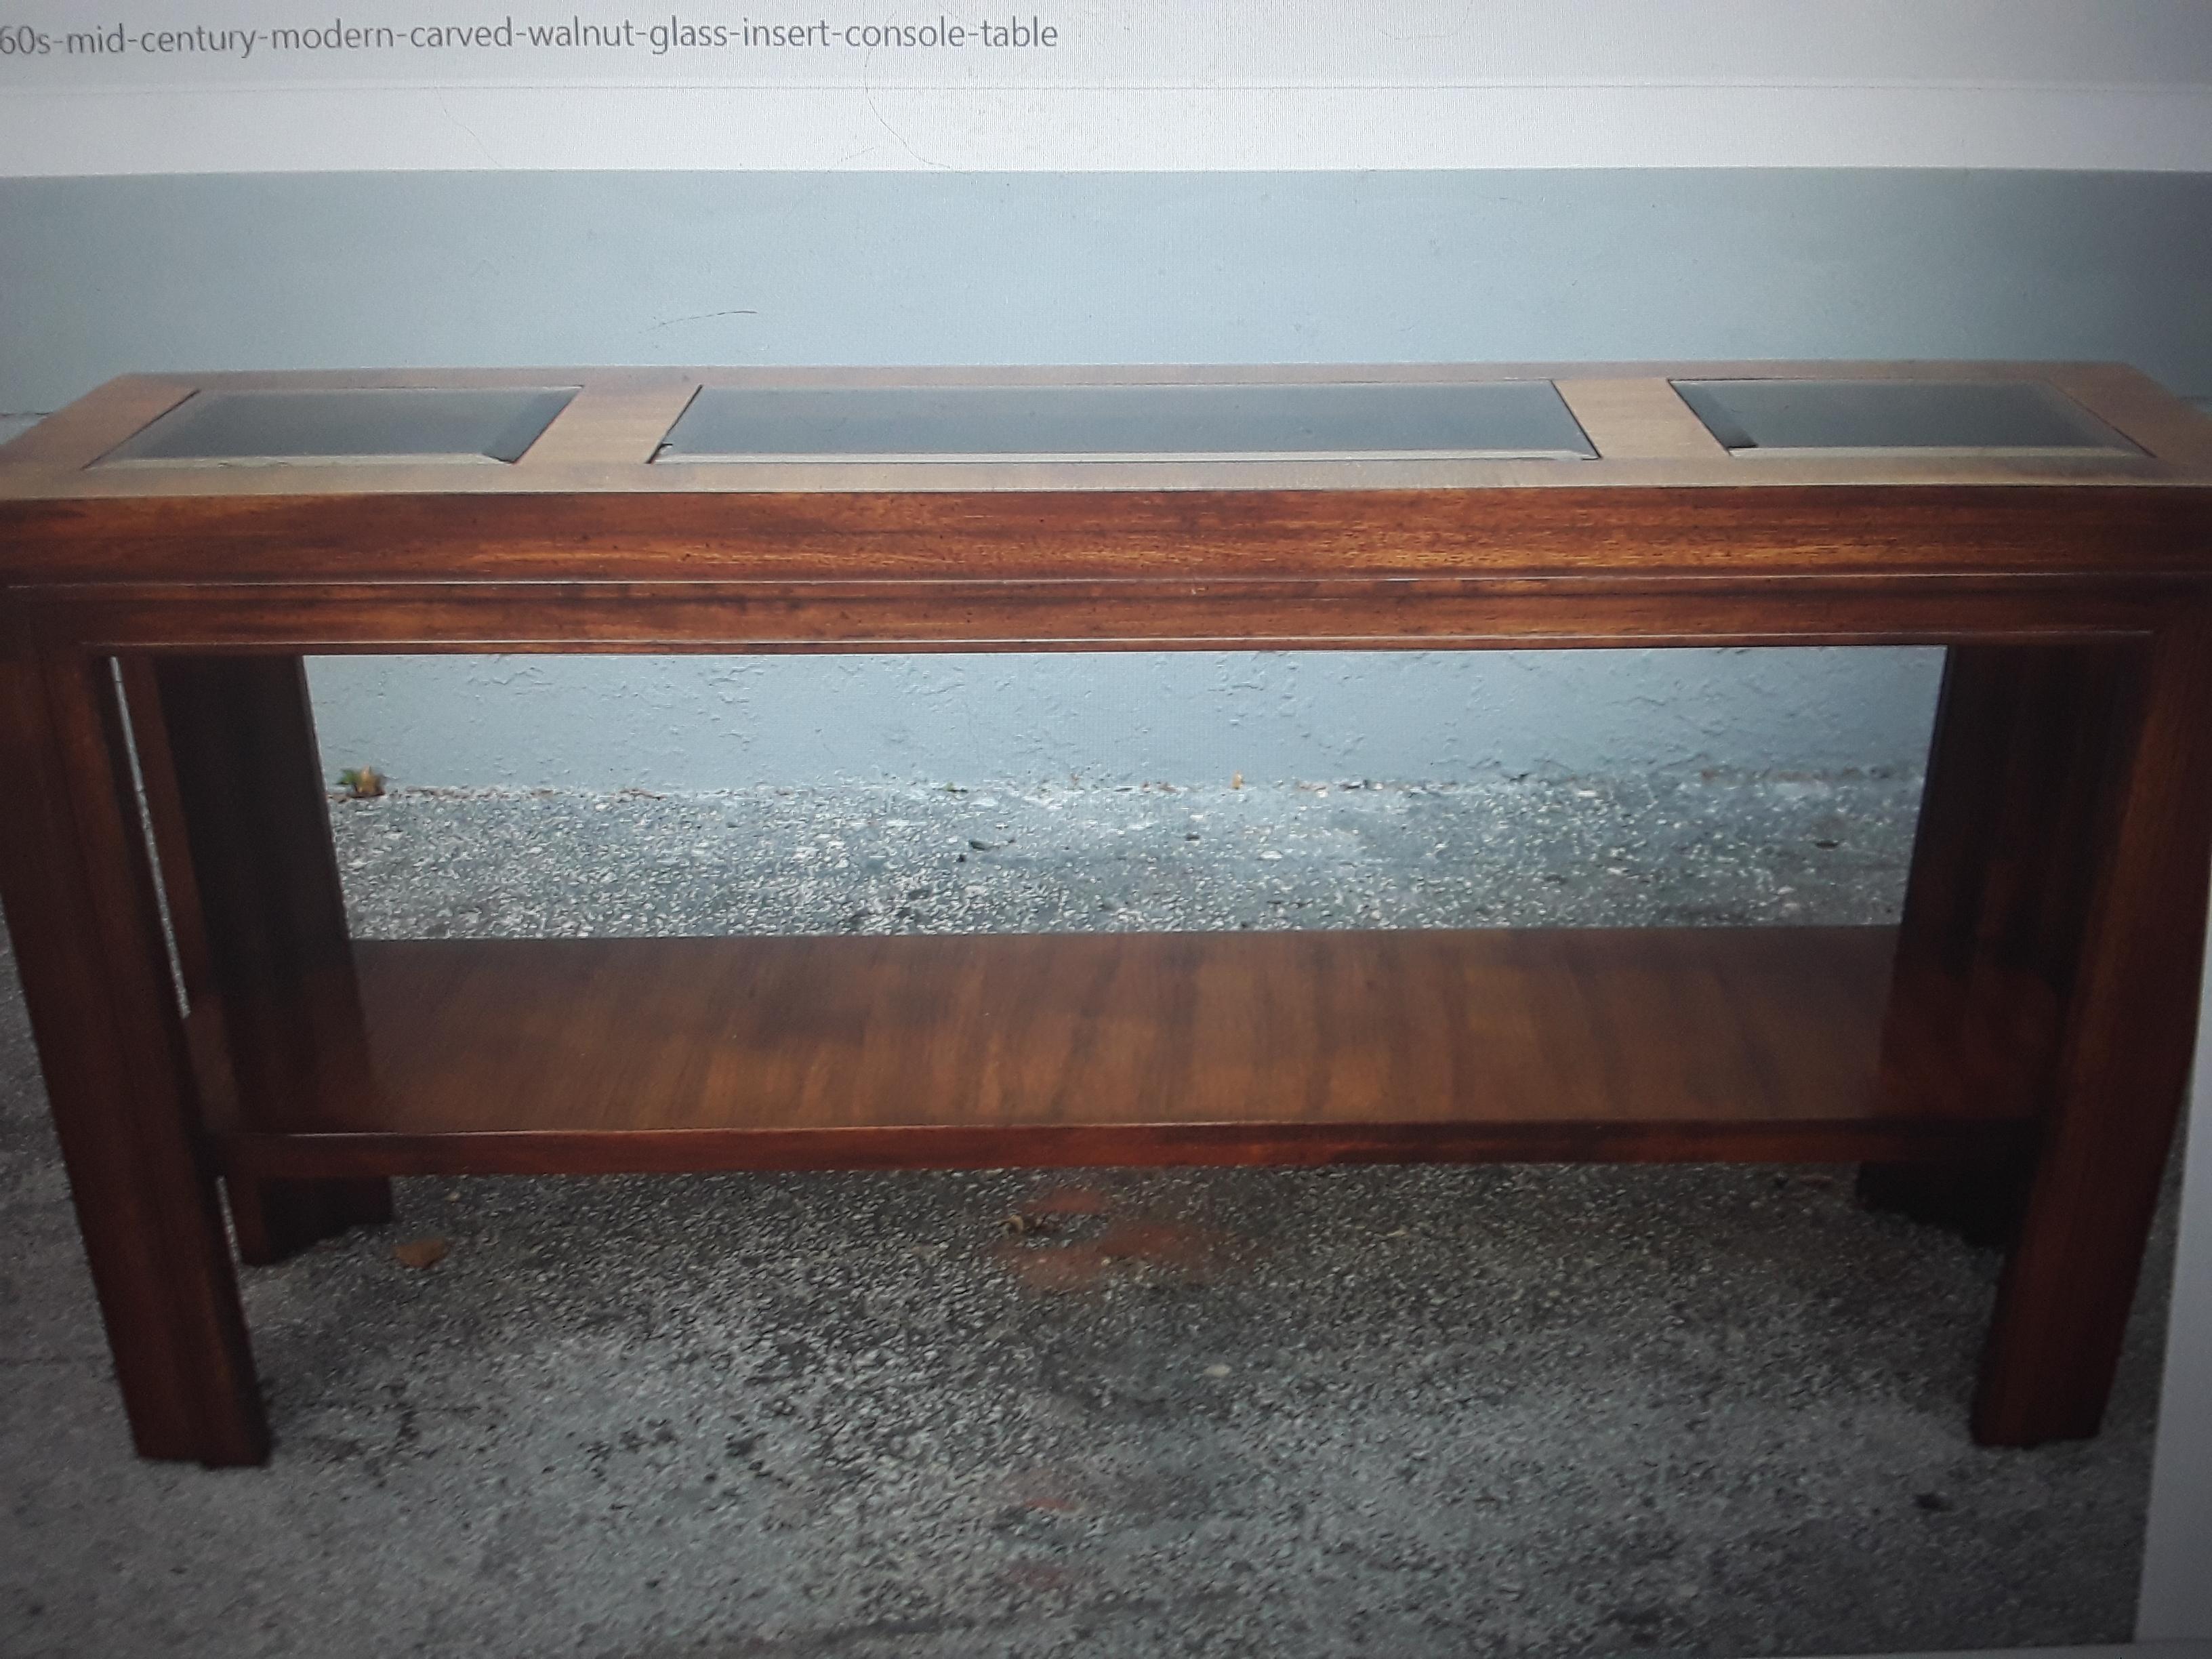 Mid-20th Century 1960's Mid Century Modern Carved Walnut/ Glass Insert Console Table/ Sofa Table For Sale